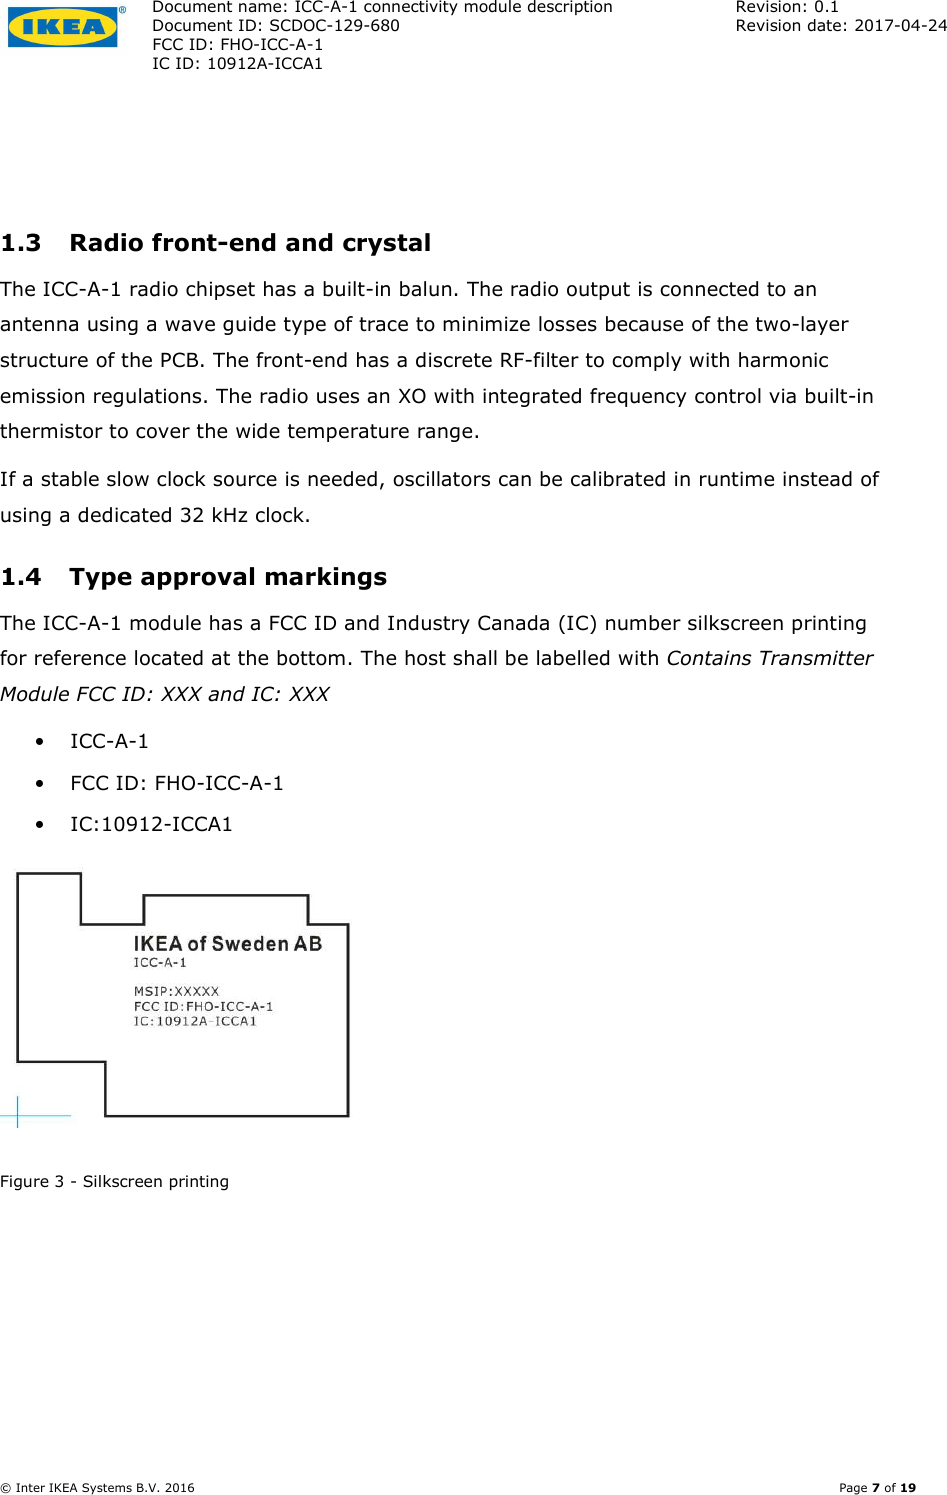 Document name: ICC-A-1 connectivity module description  Revision: 0.1 Document ID: SCDOC-129-680  Revision date: 2017-04-24  FCC ID: FHO-ICC-A-1     IC ID: 10912A-ICCA1       © Inter IKEA Systems B.V. 2016    Page 7 of 19  1.3 Radio front-end and crystal The ICC-A-1 radio chipset has a built-in balun. The radio output is connected to an antenna using a wave guide type of trace to minimize losses because of the two-layer structure of the PCB. The front-end has a discrete RF-filter to comply with harmonic emission regulations. The radio uses an XO with integrated frequency control via built-in thermistor to cover the wide temperature range. If a stable slow clock source is needed, oscillators can be calibrated in runtime instead of using a dedicated 32 kHz clock.  1.4 Type approval markings The ICC-A-1 module has a FCC ID and Industry Canada (IC) number silkscreen printing for reference located at the bottom. The host shall be labelled with Contains Transmitter Module FCC ID: XXX and IC: XXX • ICC-A-1 • FCC ID: FHO-ICC-A-1 • IC:10912-ICCA1  Figure 3 - Silkscreen printing 